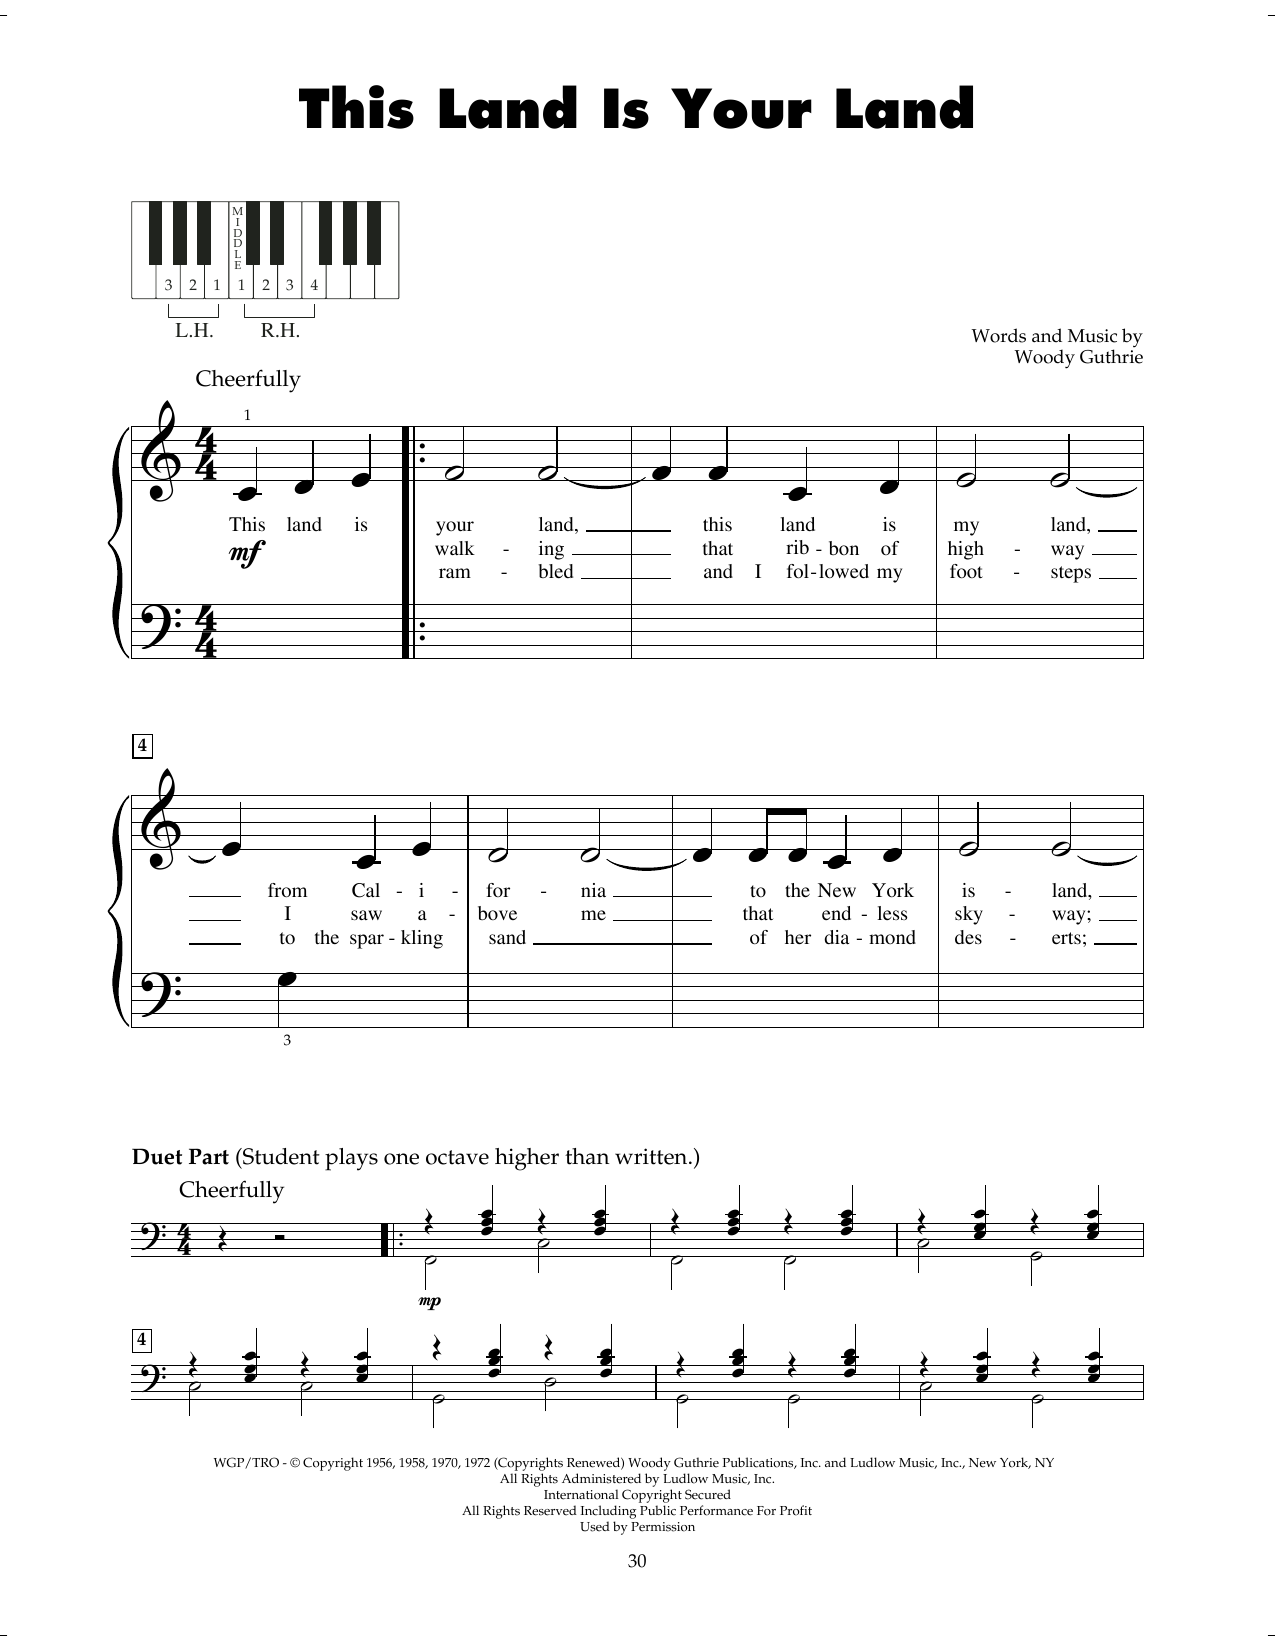 Woody Guthrie This Land Is Your Land sheet music notes printable PDF score